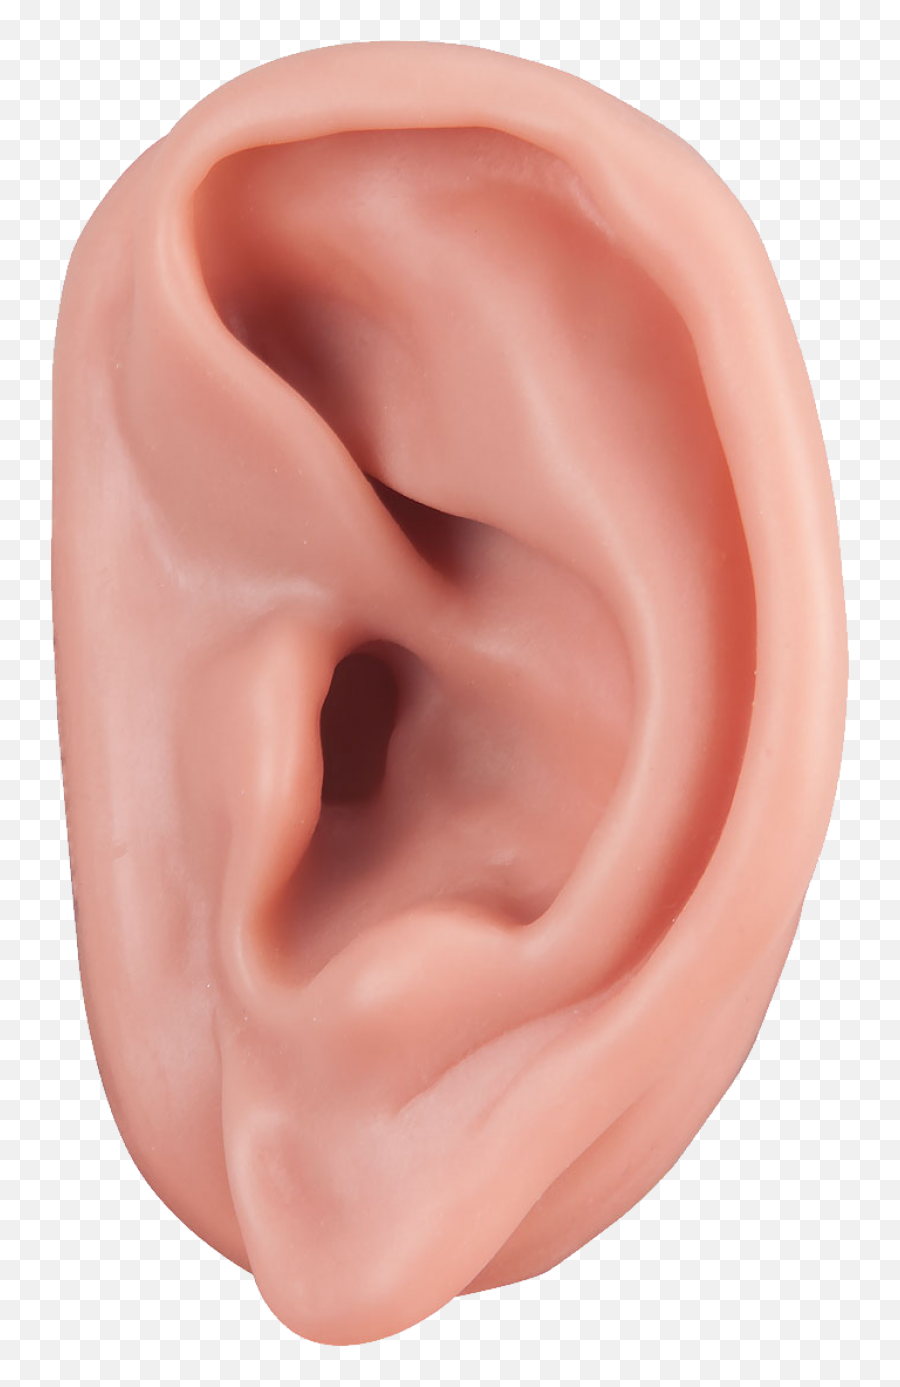 Ear Png Image Free Download - Ear Png,Ear Png